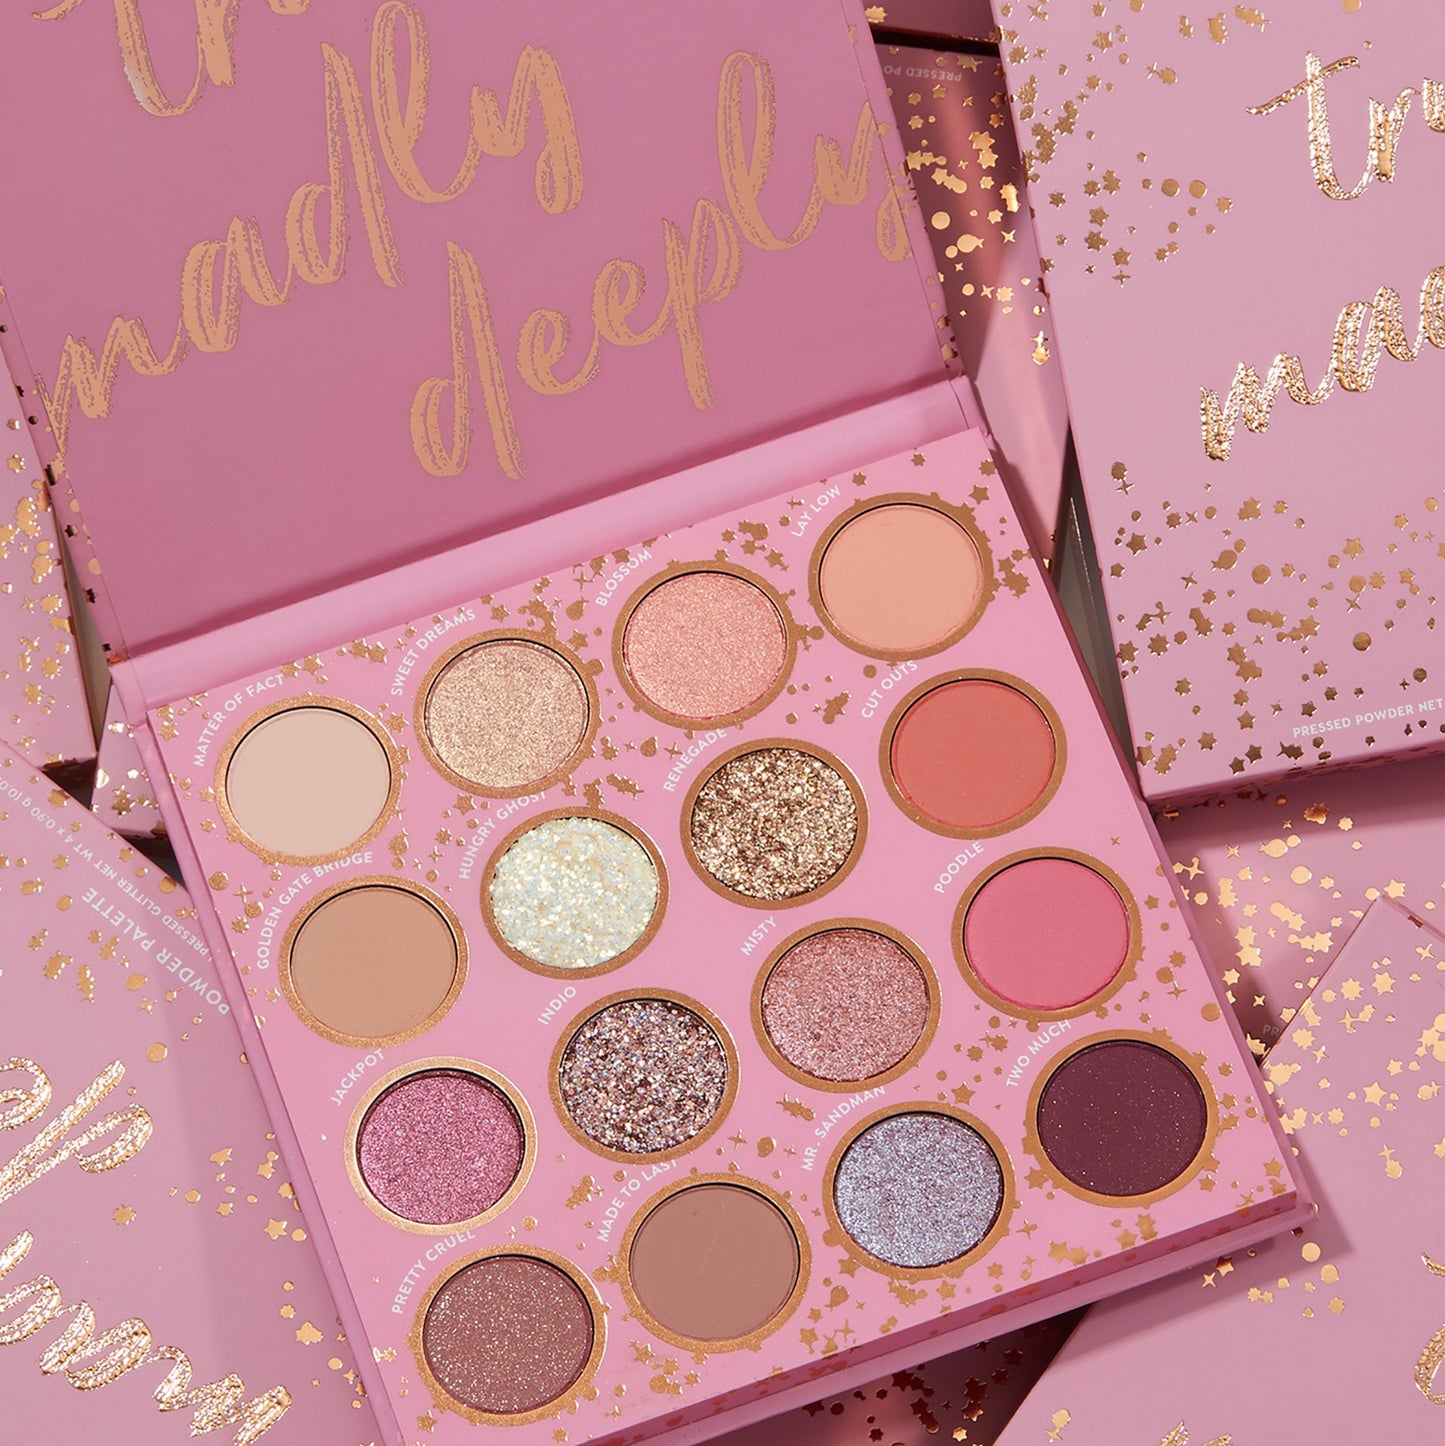 Truly Madly Deeply Palette